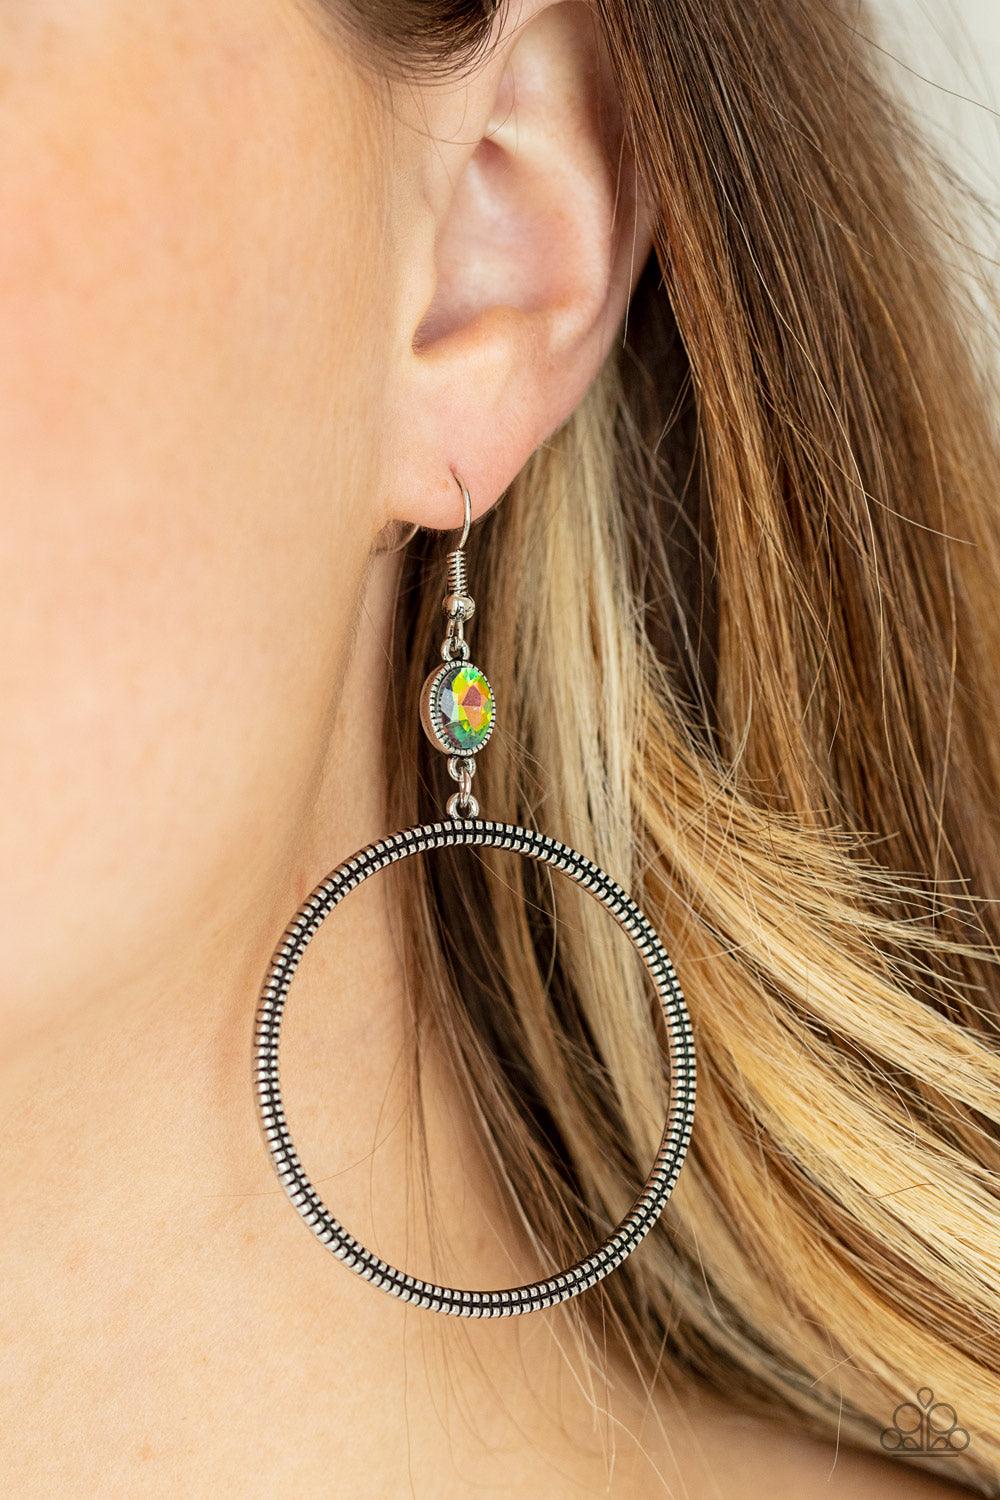 Paparazzi Accessories Work That Circuit - Multi A slim oversized silver ring, highlighted by two concentric circles of dotted texture, dangles from an oval oil spill gem for an edgy refined look. Earring attaches to a standard fishhook fitting. Sold as on